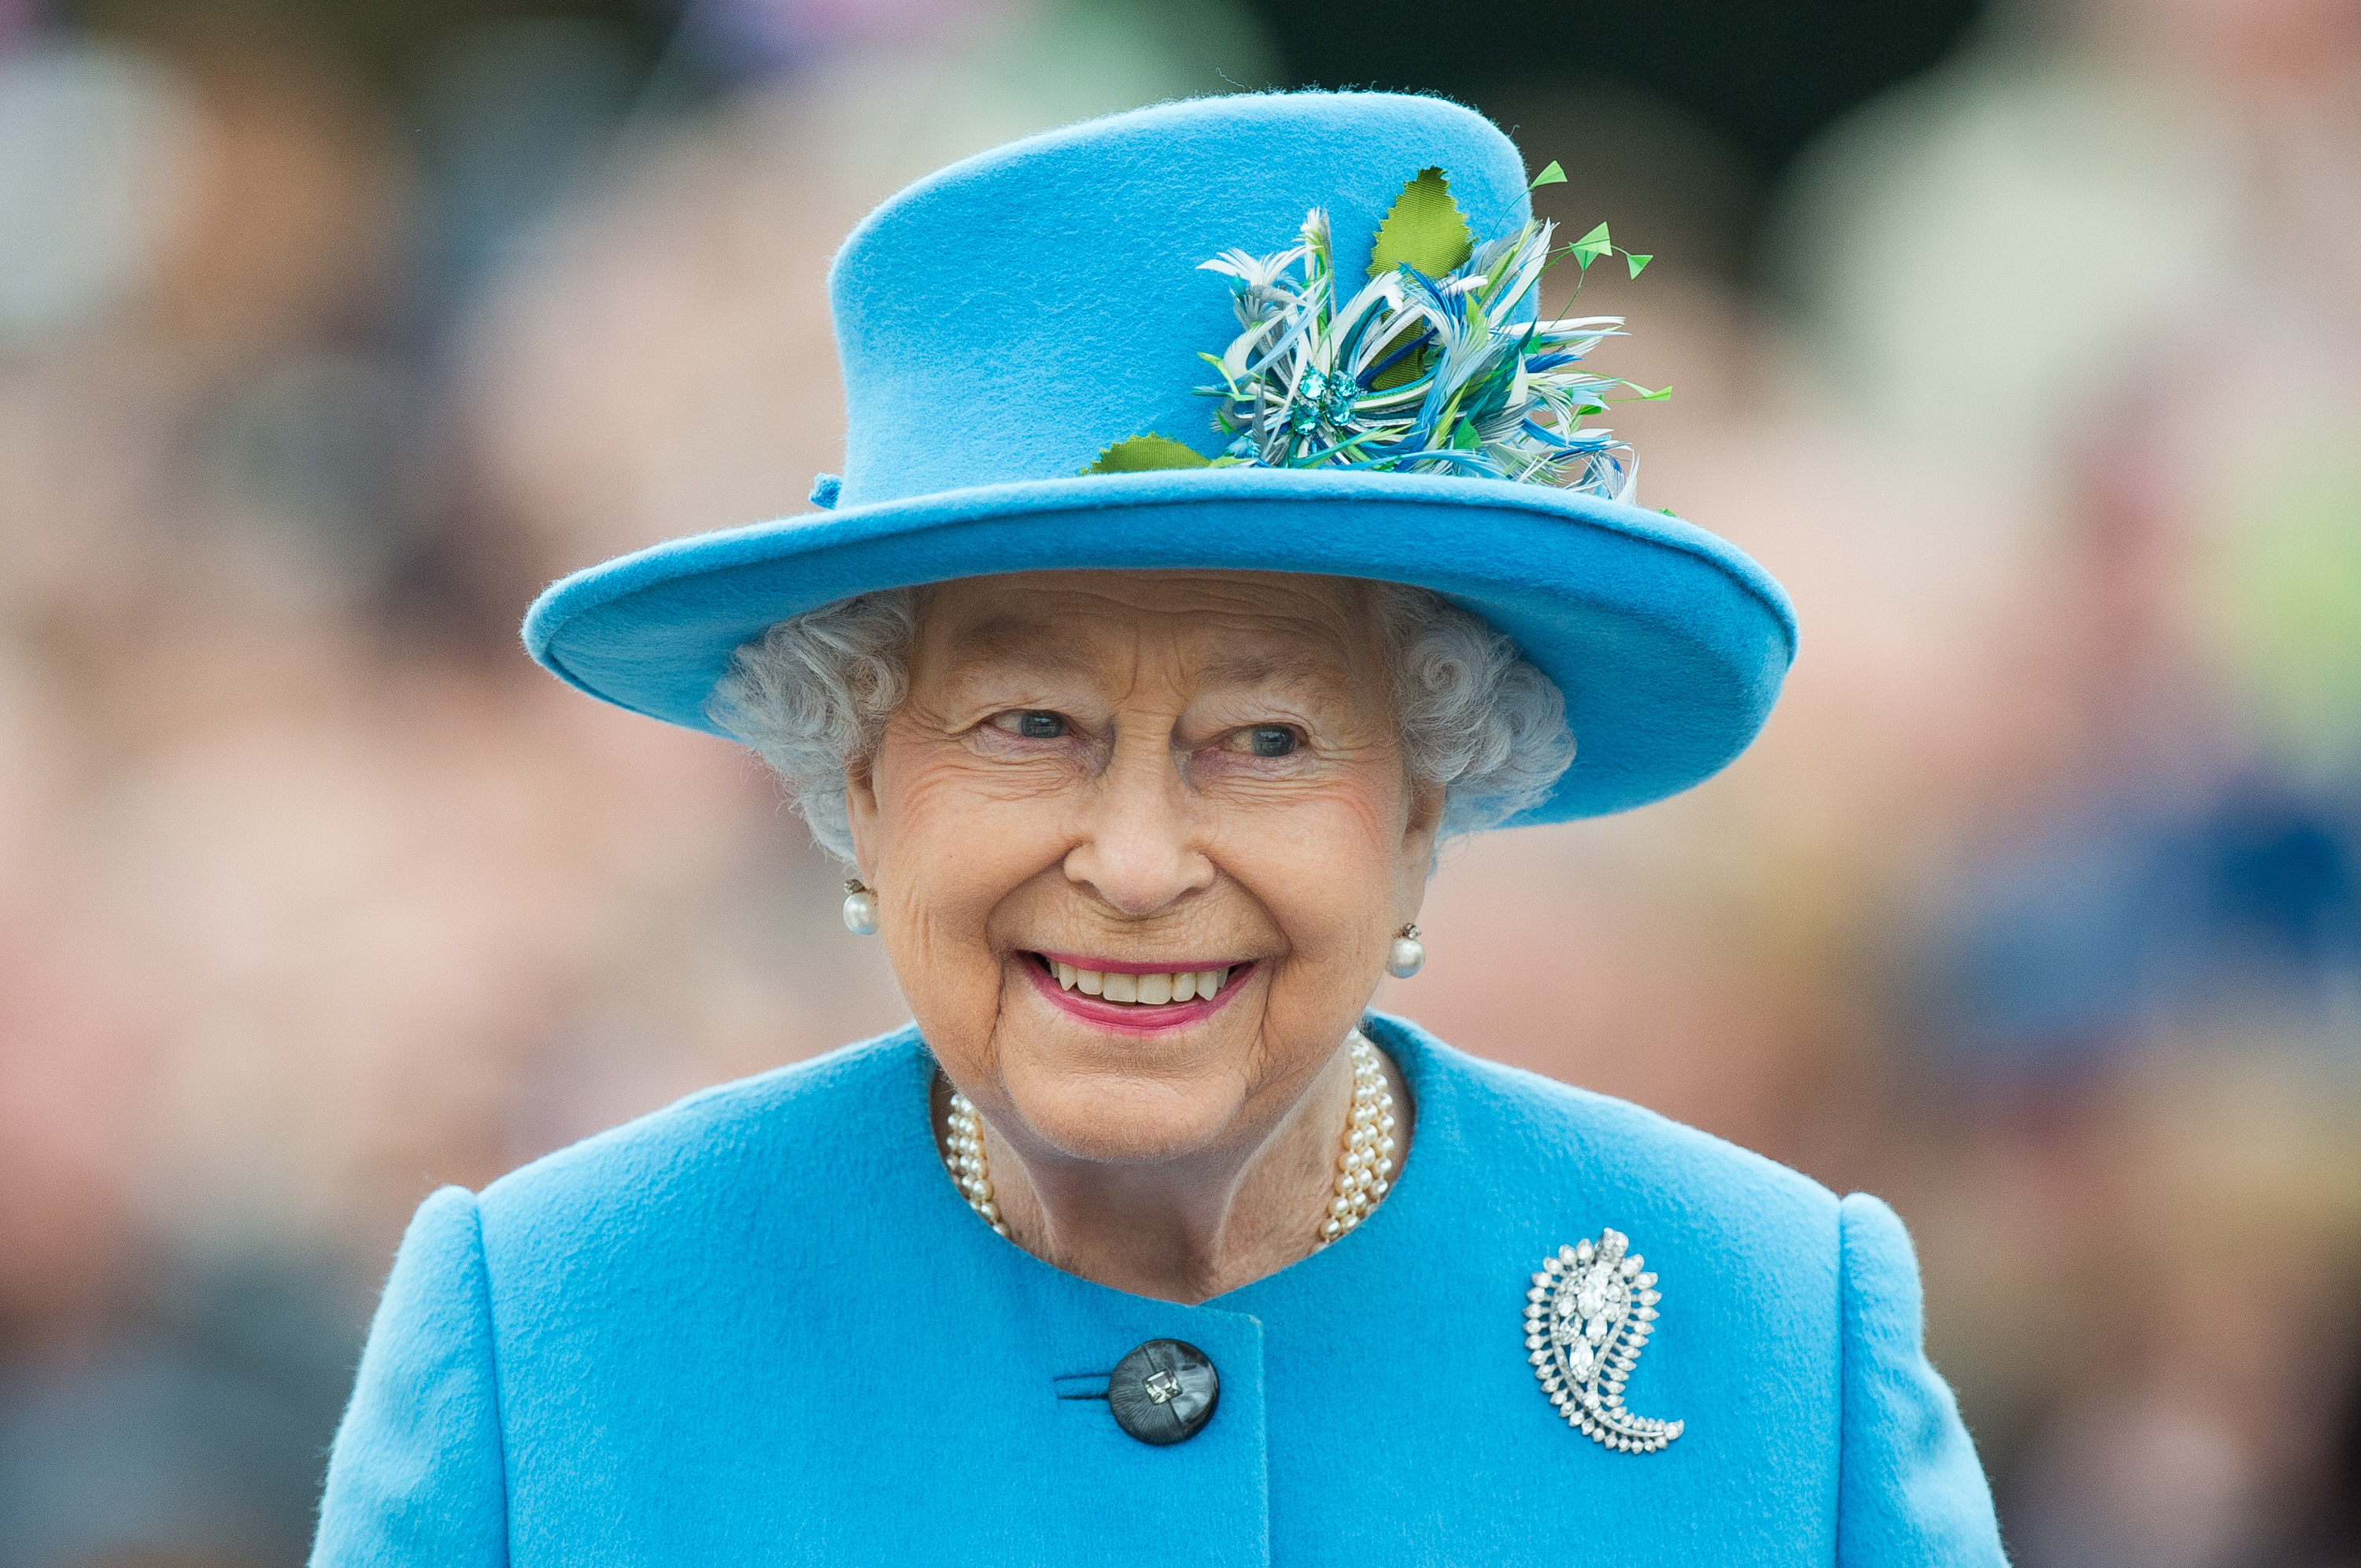 Queen Elizabeth II wearing blue and smiling as she tours Queen Mother Square